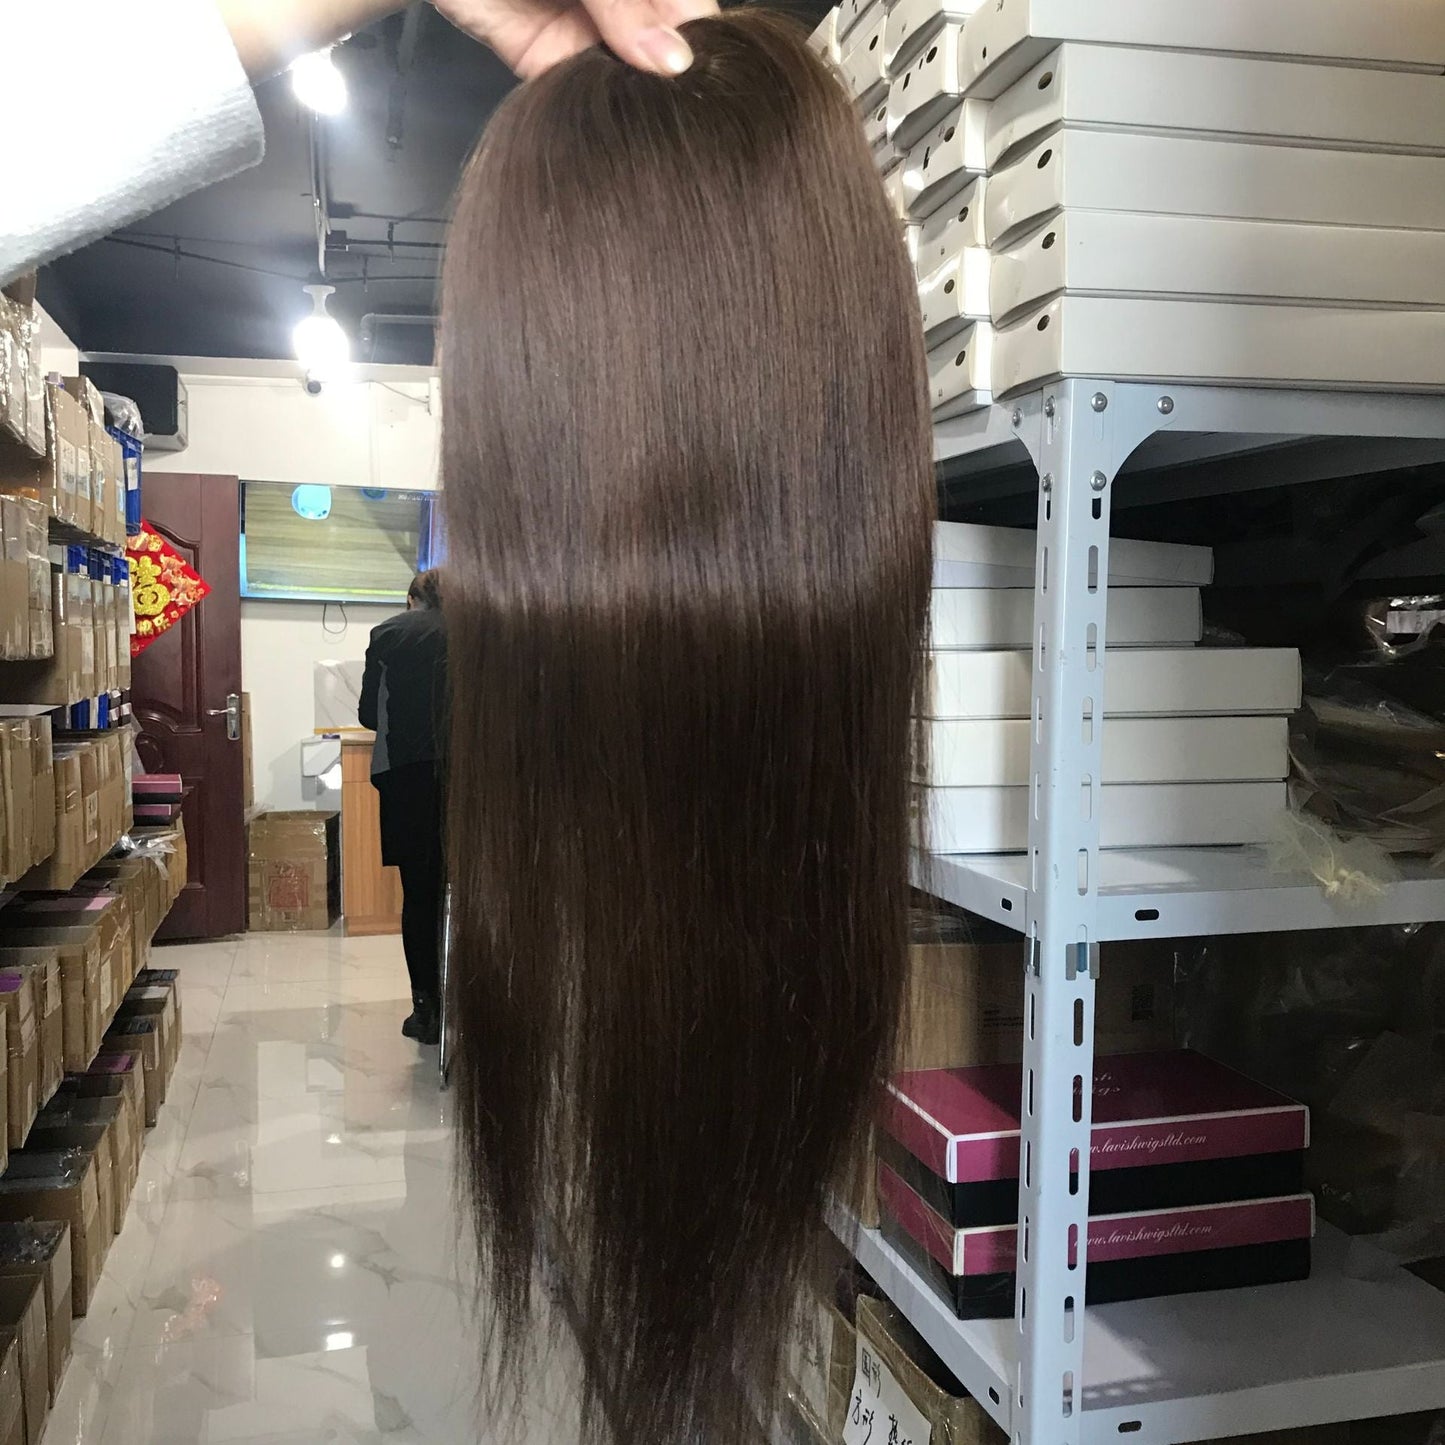 16Inches Human Hair Breathable Mono With Clip Toupee Women Wig Hair Piece all hand woven